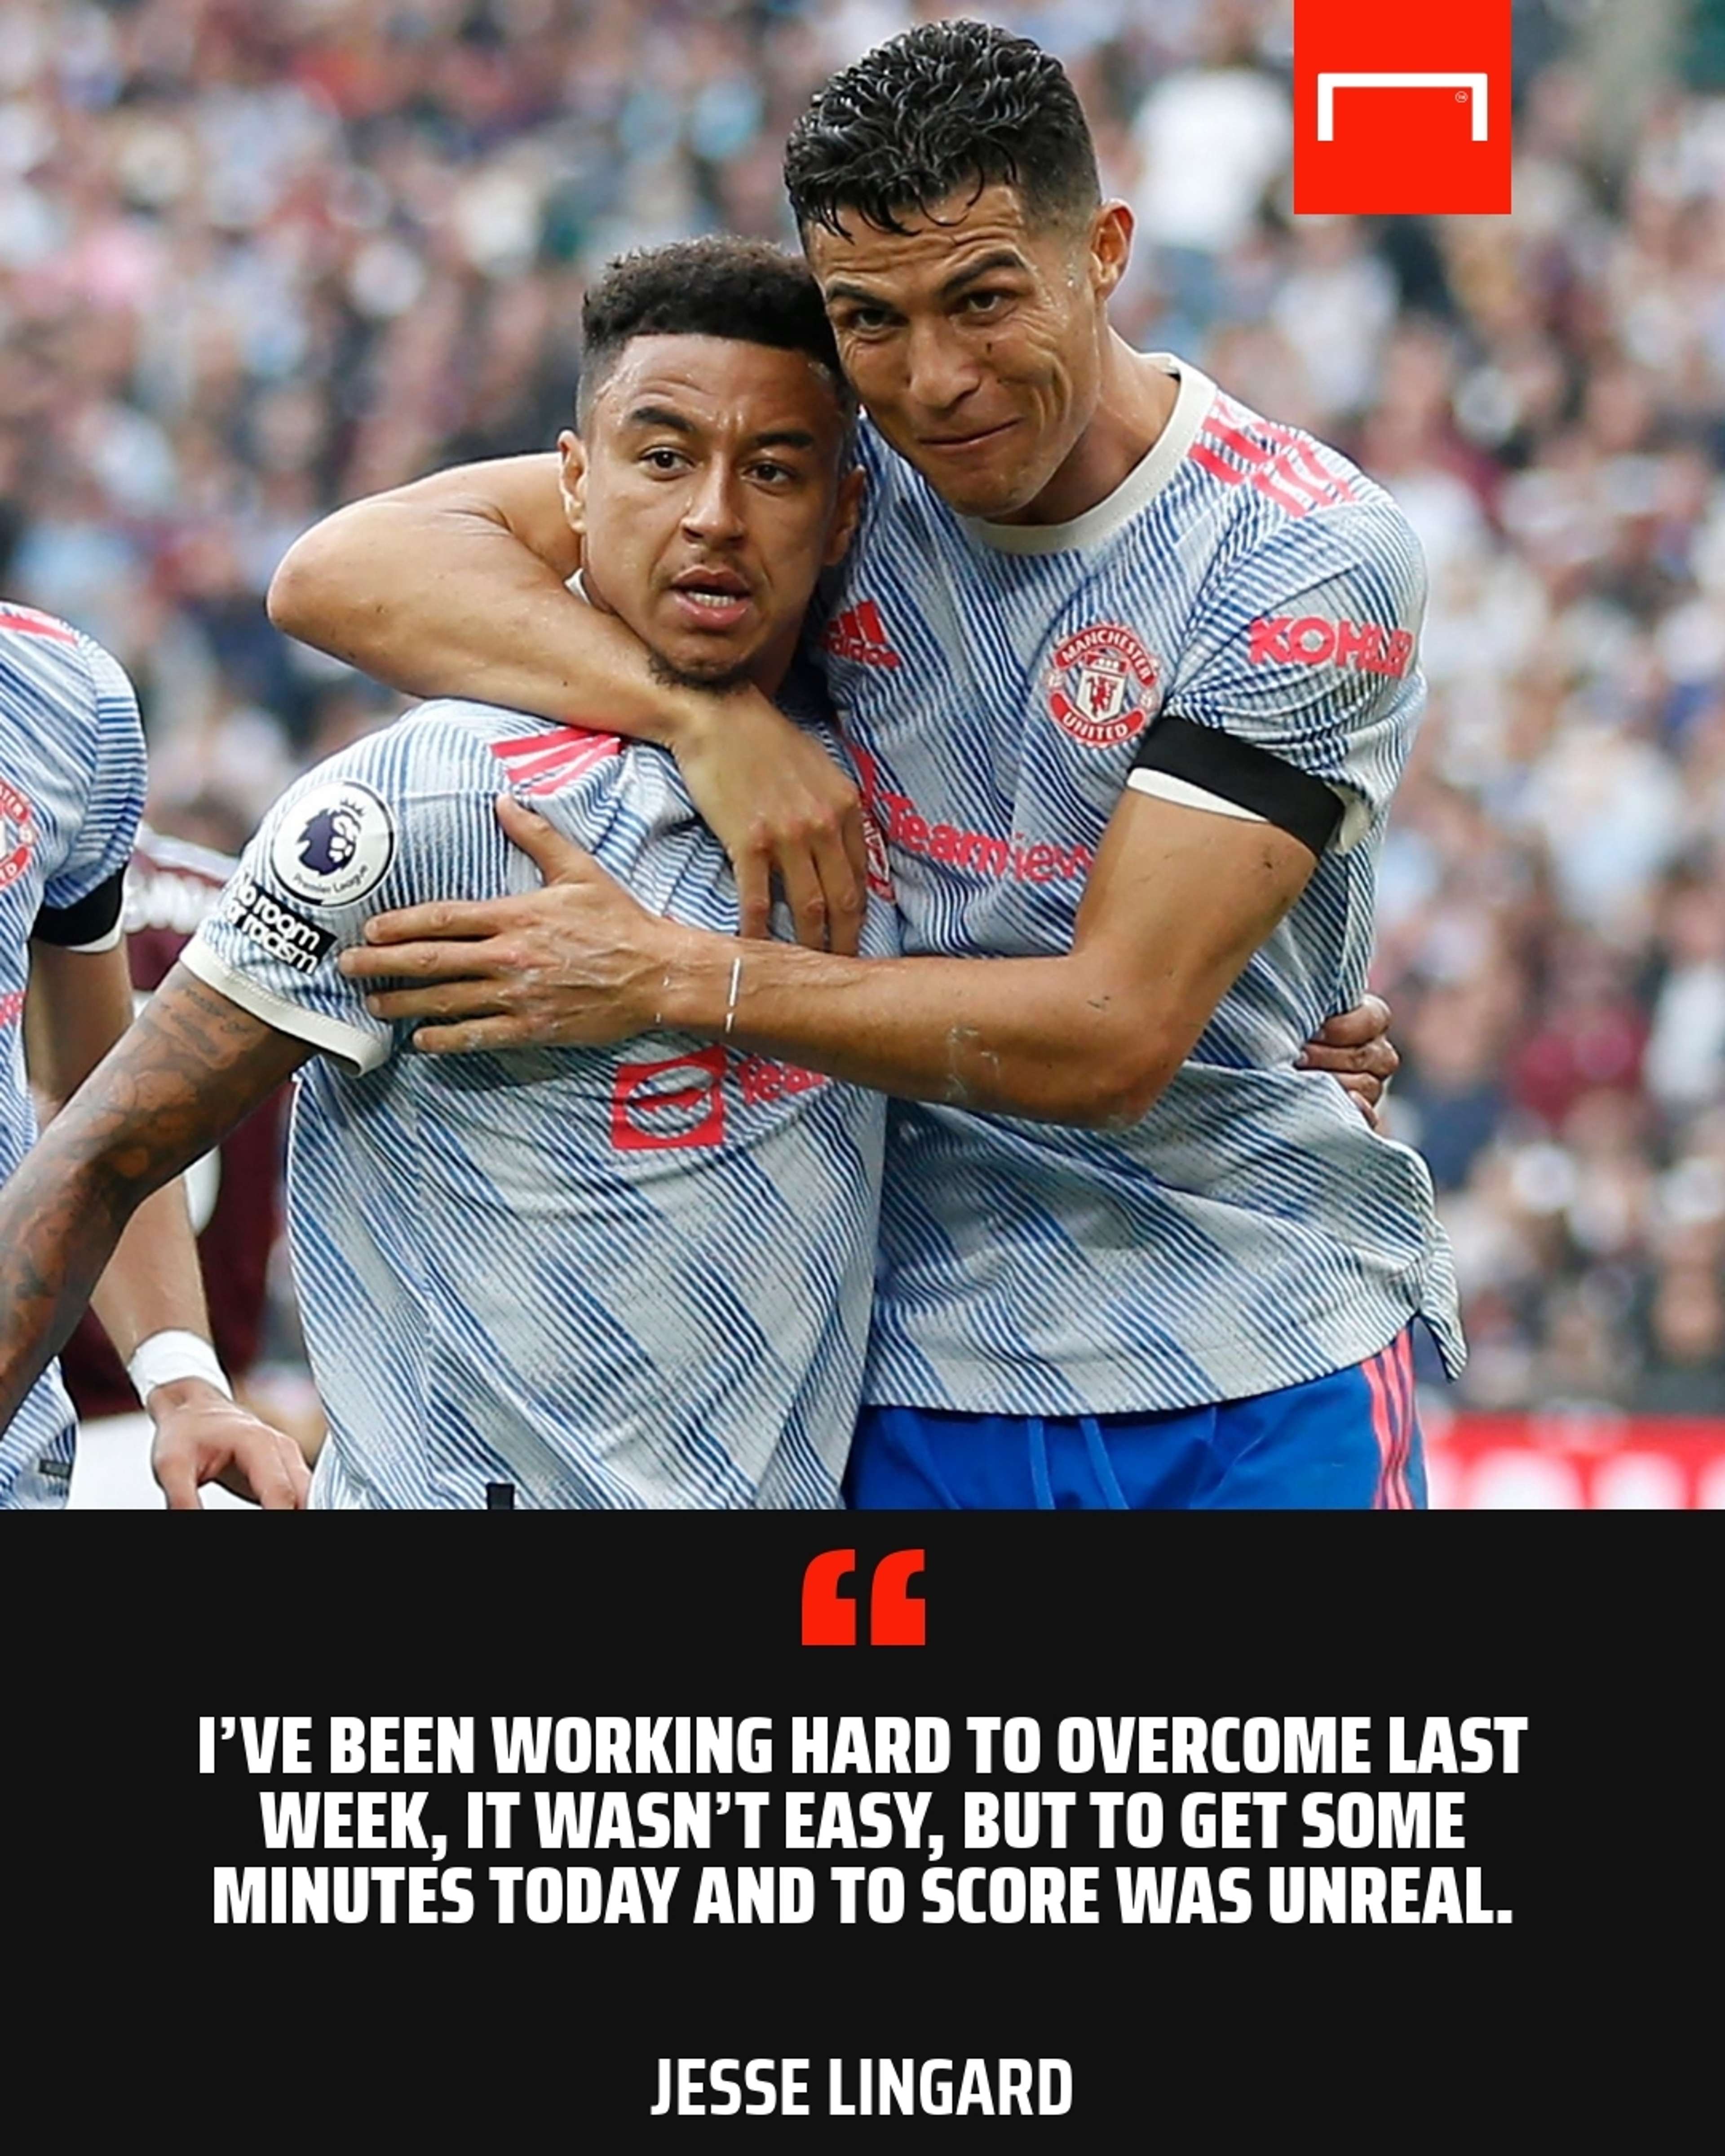 Jesse Lingard Manchester United quote GFX